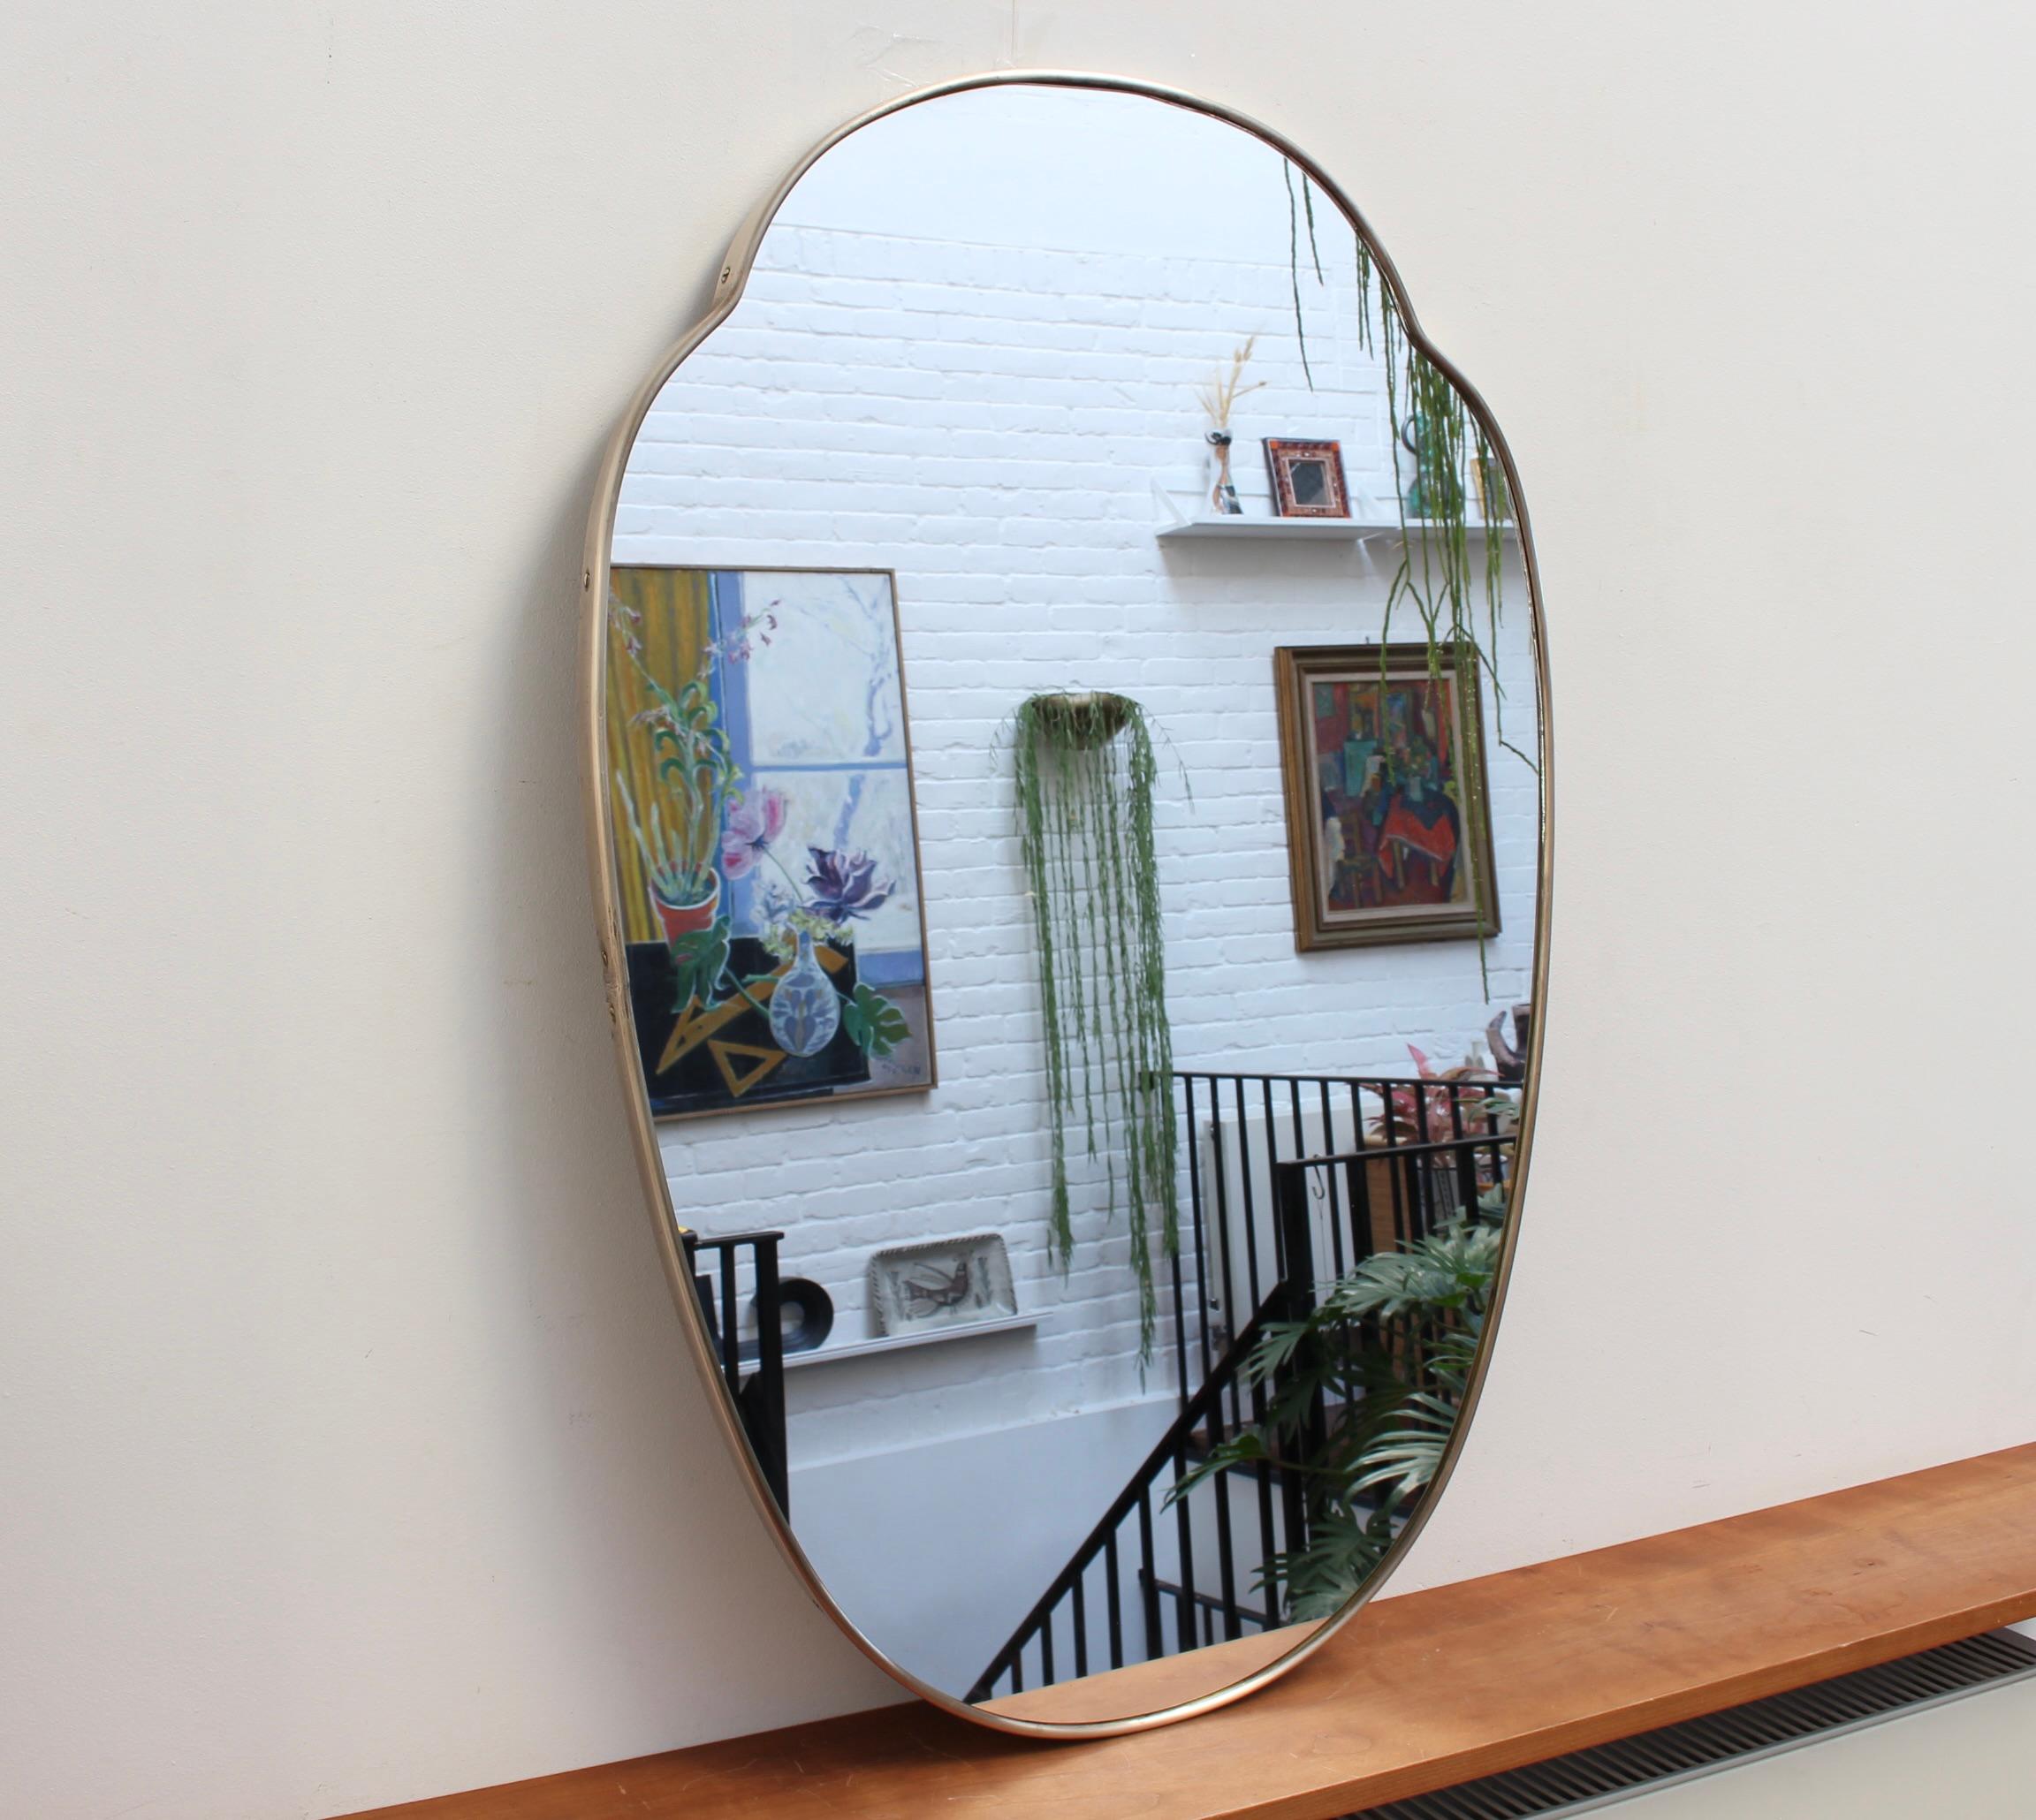 Mid-century Italian wall mirror with brass frame (circa 1950s). The mirror is classically-shaped and distinctive in a Modern style. It is in very good overall condition. A beautiful, aged patina on the recently polished brass frame attests to the